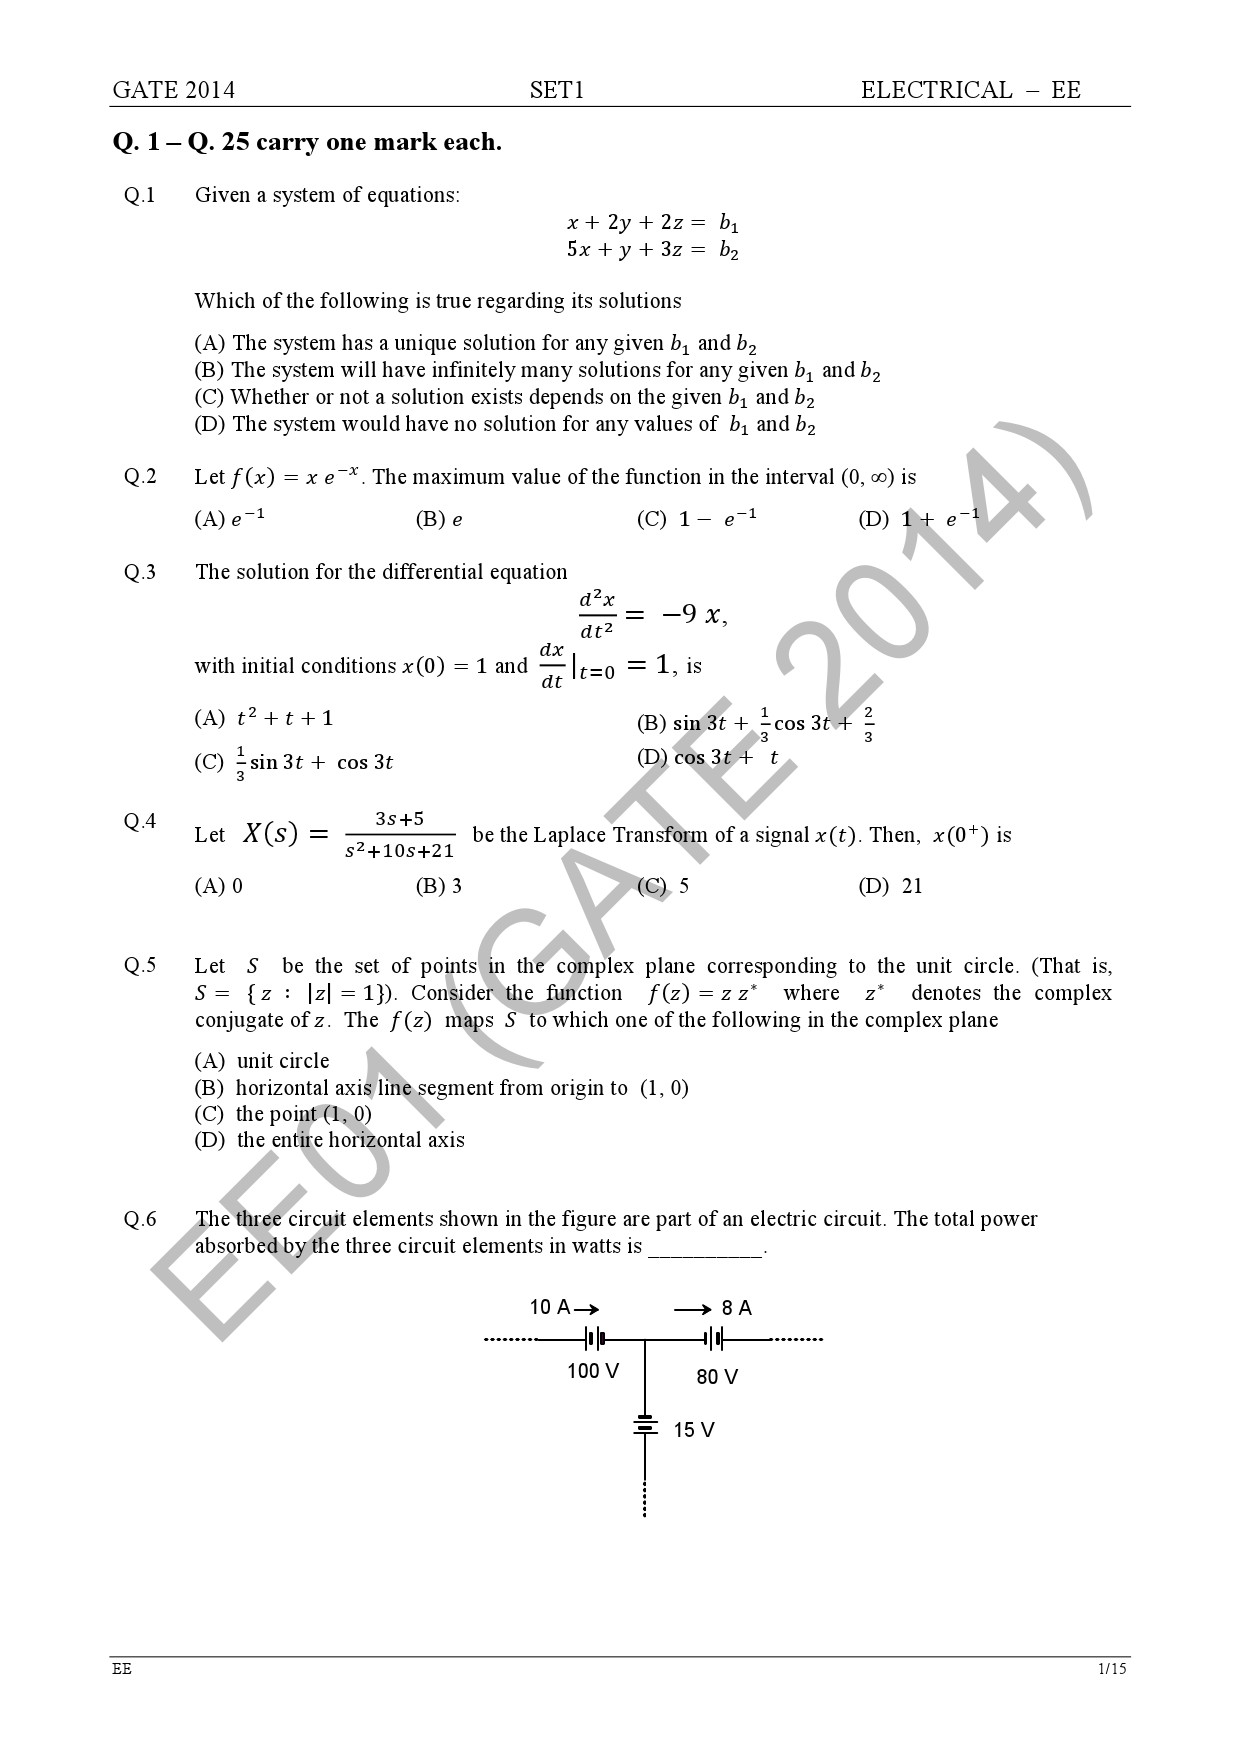 GATE Exam Question Paper 2014 Electrical Engineering Set 1 7